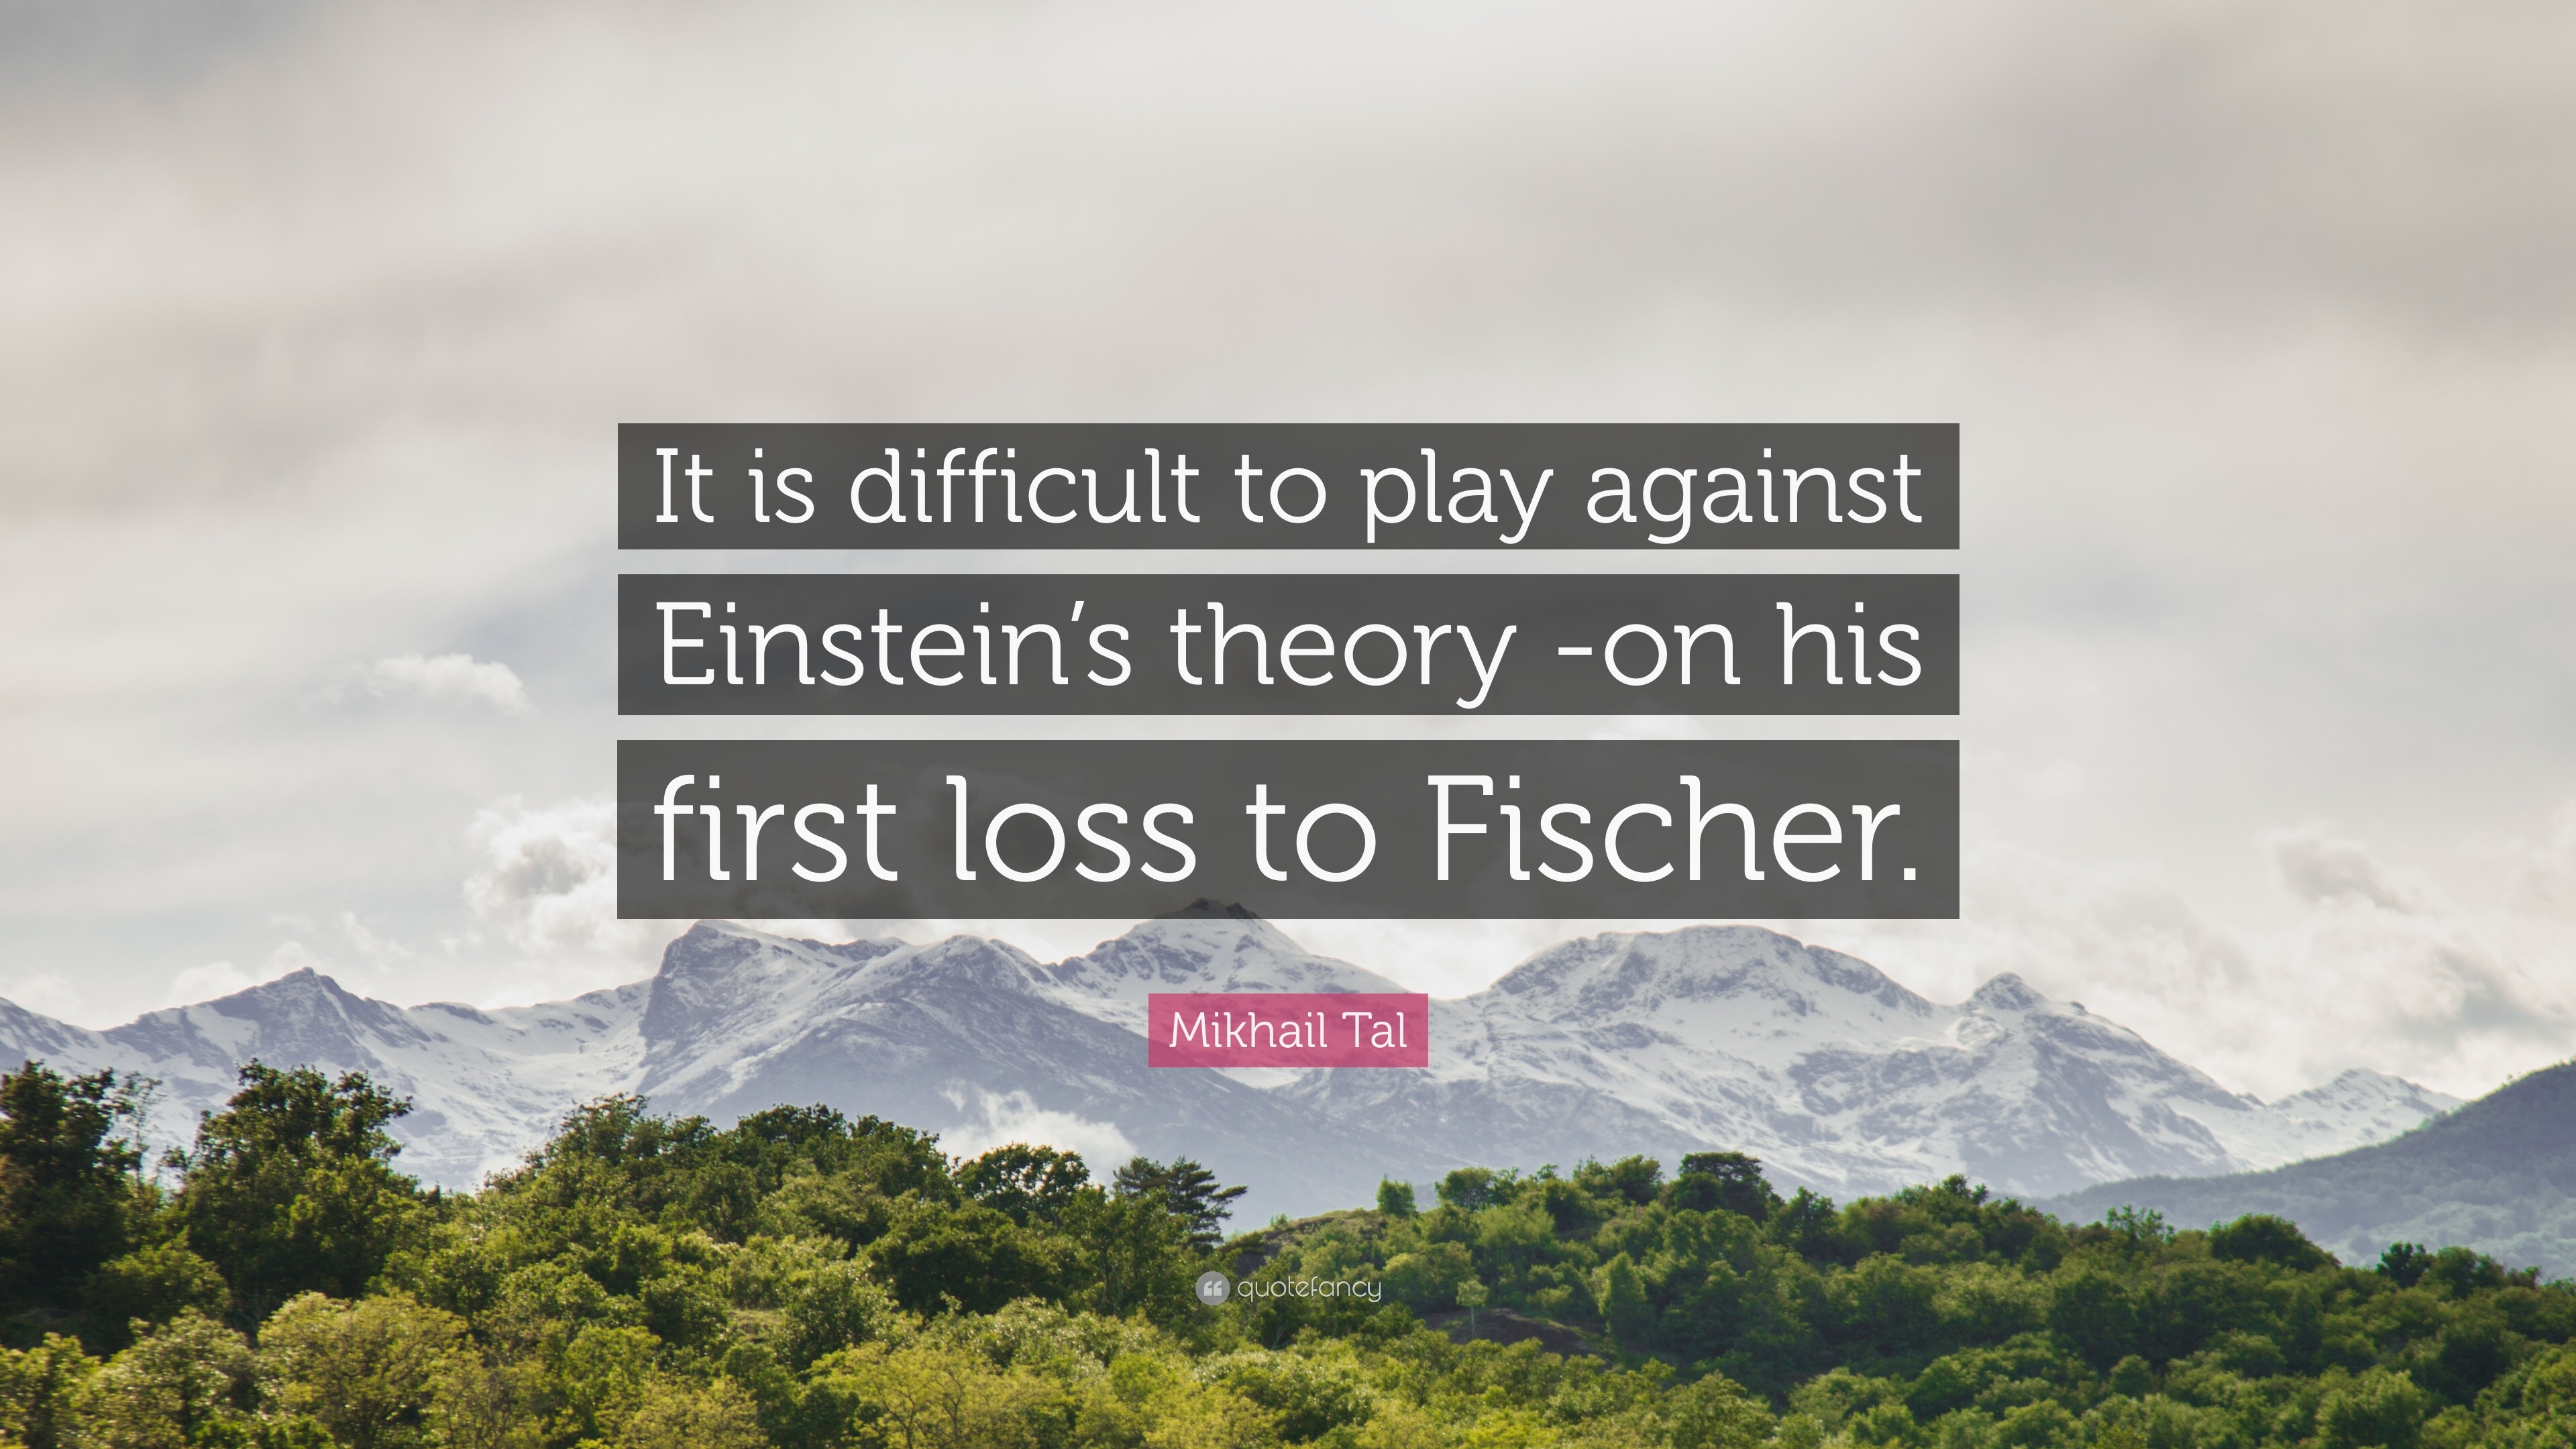 Mikhail Tal Quote: “It is difficult to play against Einstein's theory -on  his first loss to